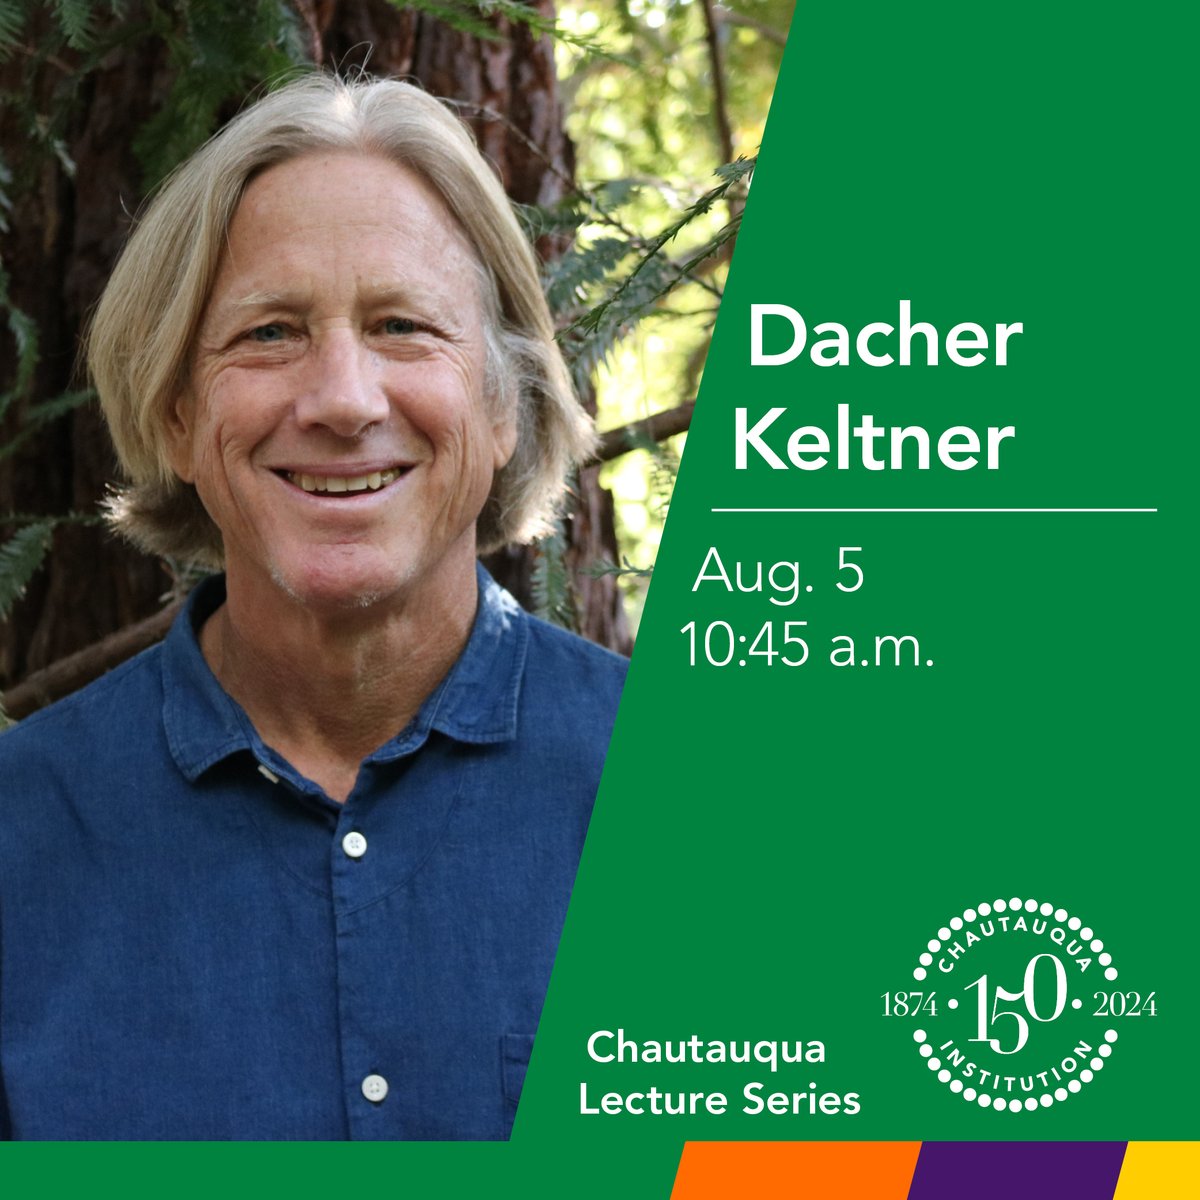 🚨#CHQ2024 ANNOUNCEMENT🚨 Professor of psychology at the University of California, Berkeley, and director of the Berkeley Social Interaction Lab, Dacher Keltner joins Chautauqua's enlightening lecture lineup for our 150th year! #CHQ2024 #chq150 #INFWeekSeven